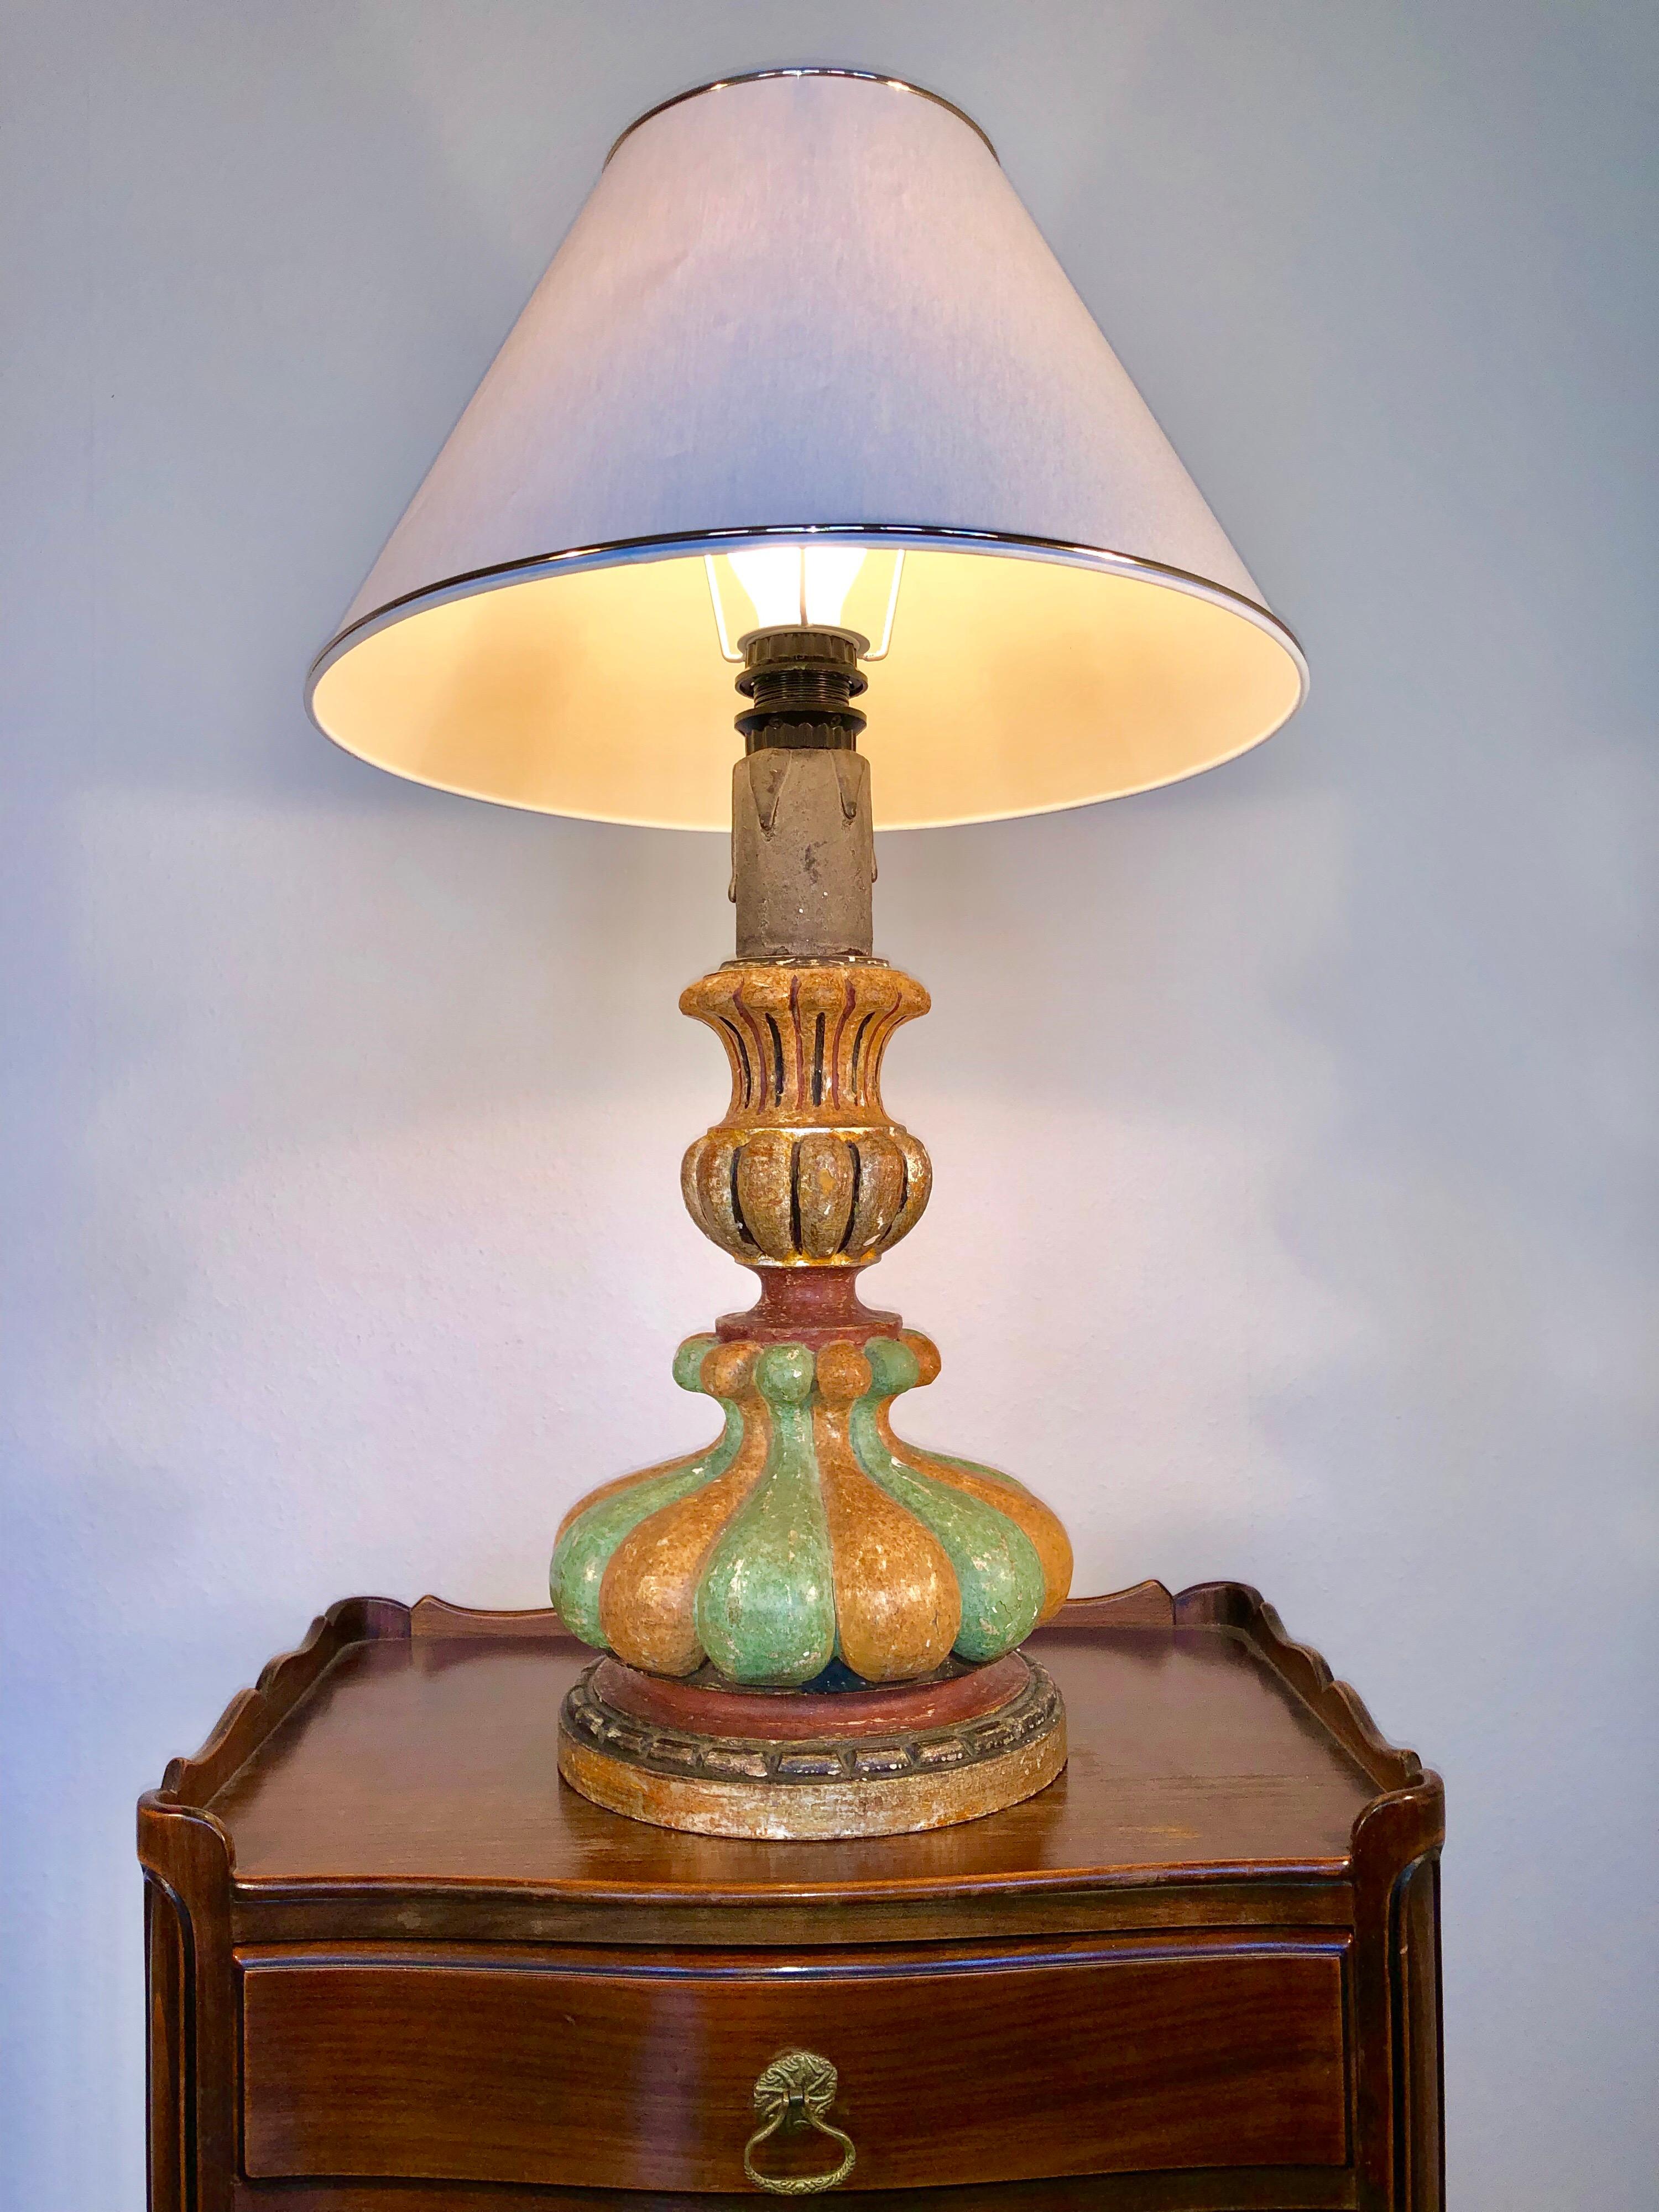 Hand-Carved Italian Hand Painted Carved Wood Table Lamp, Midcentury, circa 1980 ON SALE 